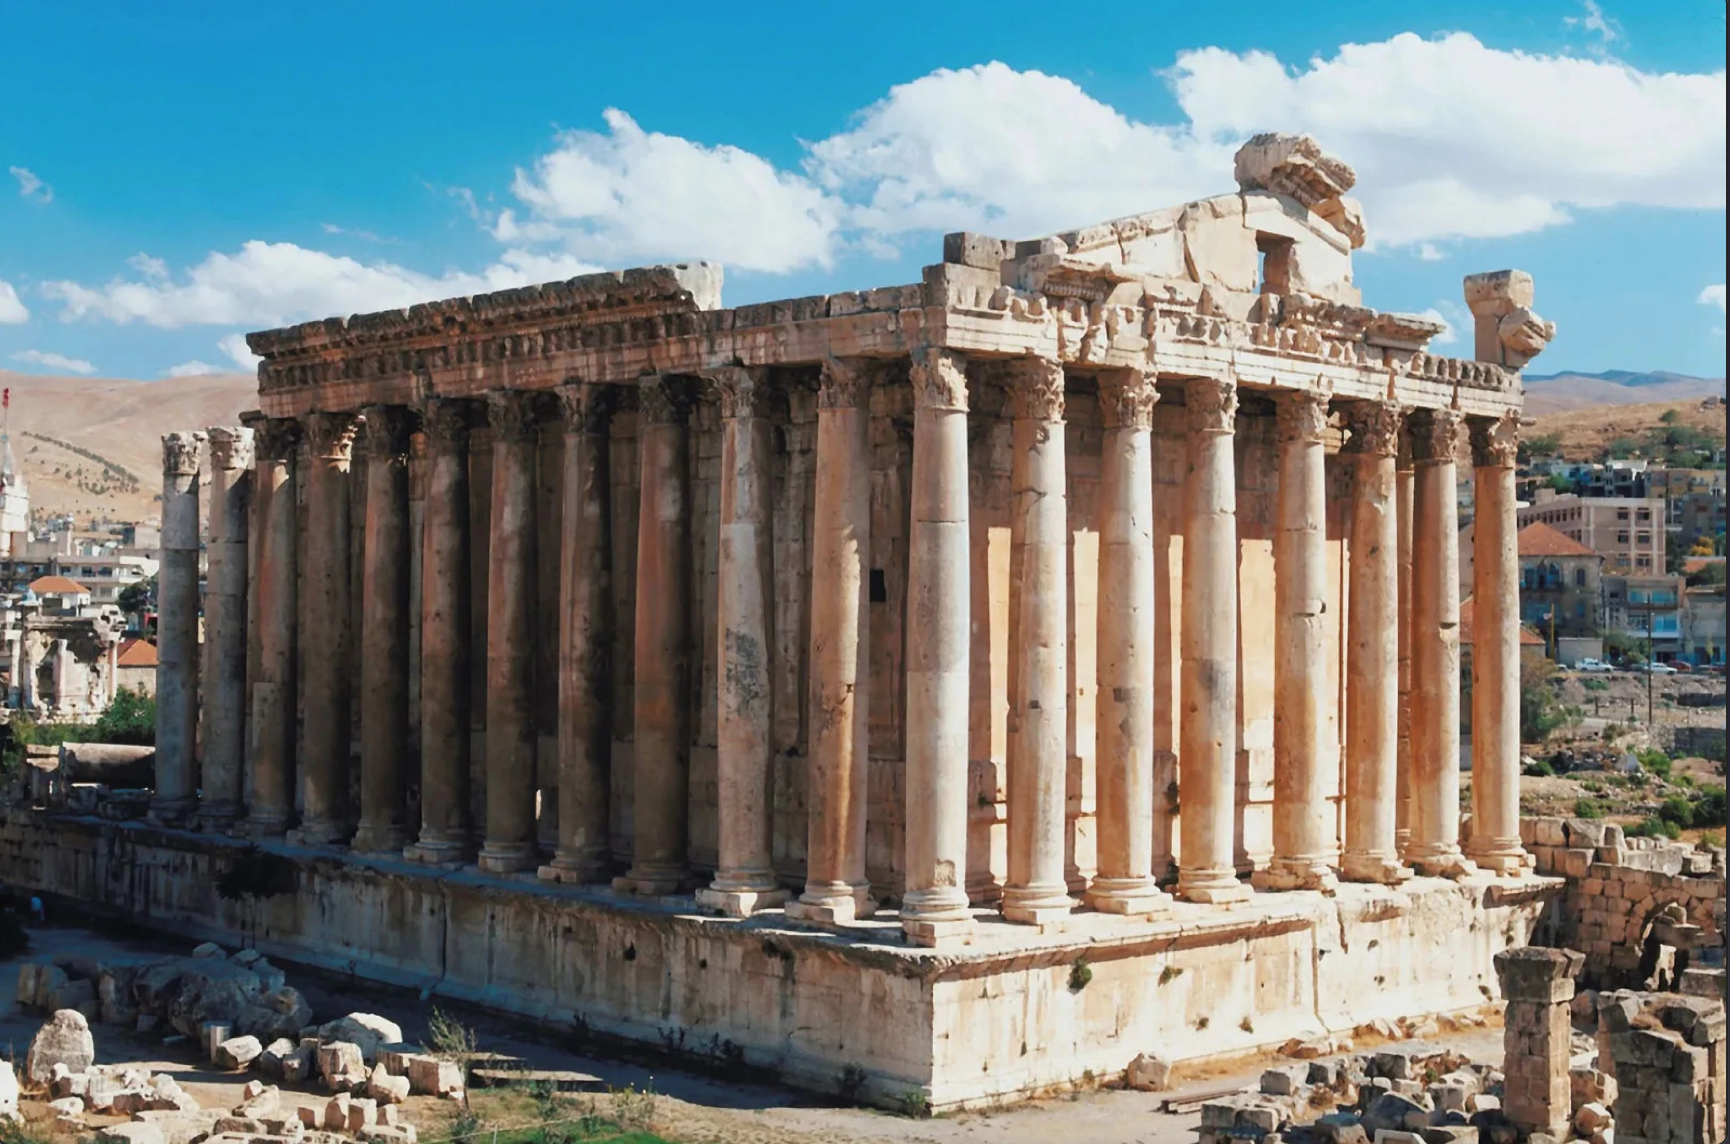 <p><span><span><span><span><span><span>The ancient Roman ruins of Baalbek in Lebanon were a tribute to three Roman gods, Jupiter, Venus, and Mercury. The city fell under the sword of Alexander the Great in 334 BCE, and he changed its name to Heliopolis.</span></span></span></span></span></span></p>  <p><span><span><span><span><span><span>During subsequent years, leaders commissioned several distinctive Roman-style temples, of which the Temple of Bacchus, shown in the photo, is one of the most elaborate and expansive at this UNESCO site. These ruins contain some of the finest examples of Hellenic architecture that still exist today.</span></span></span></span></span></span></p>